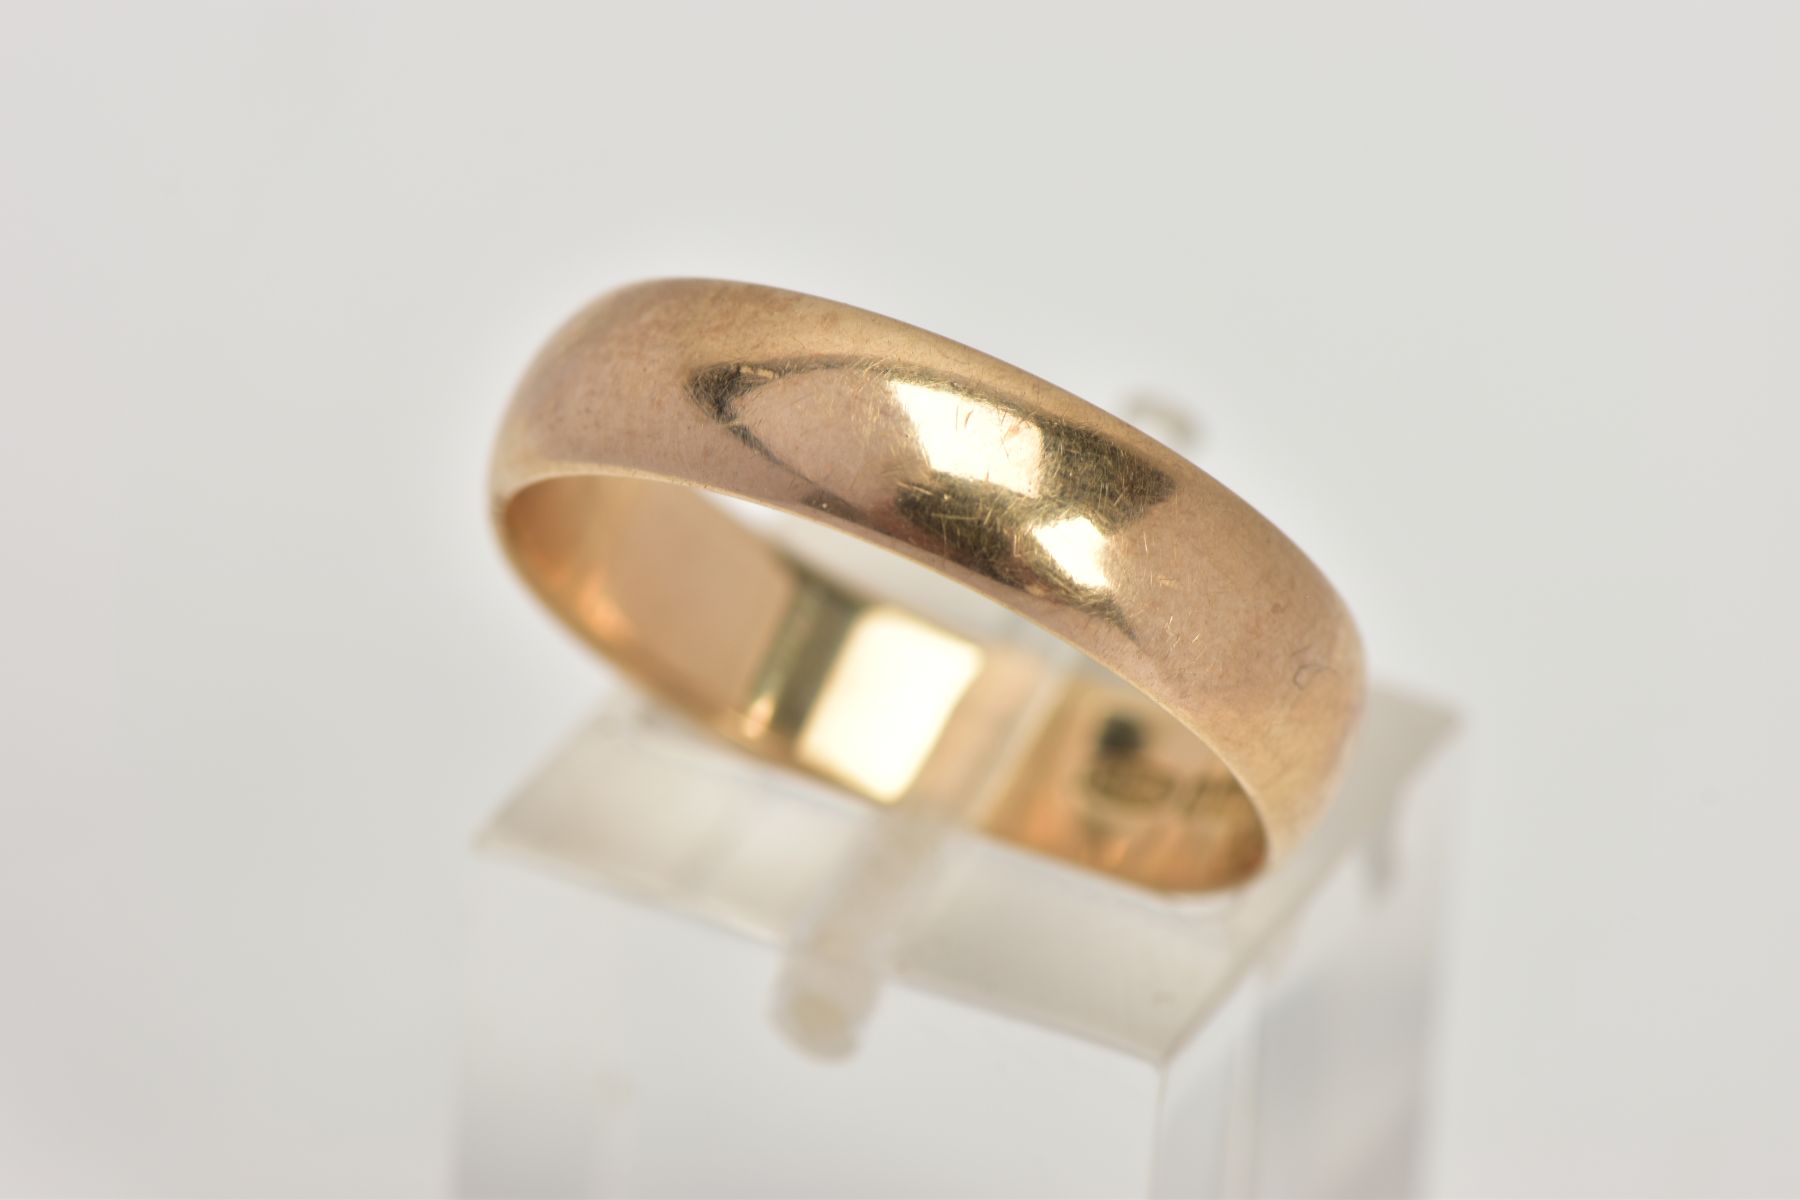 A 9CT GOLD BAND RING, plain polished wide band, approximate width 5.2mm, hallmarked 9ct Birmingham